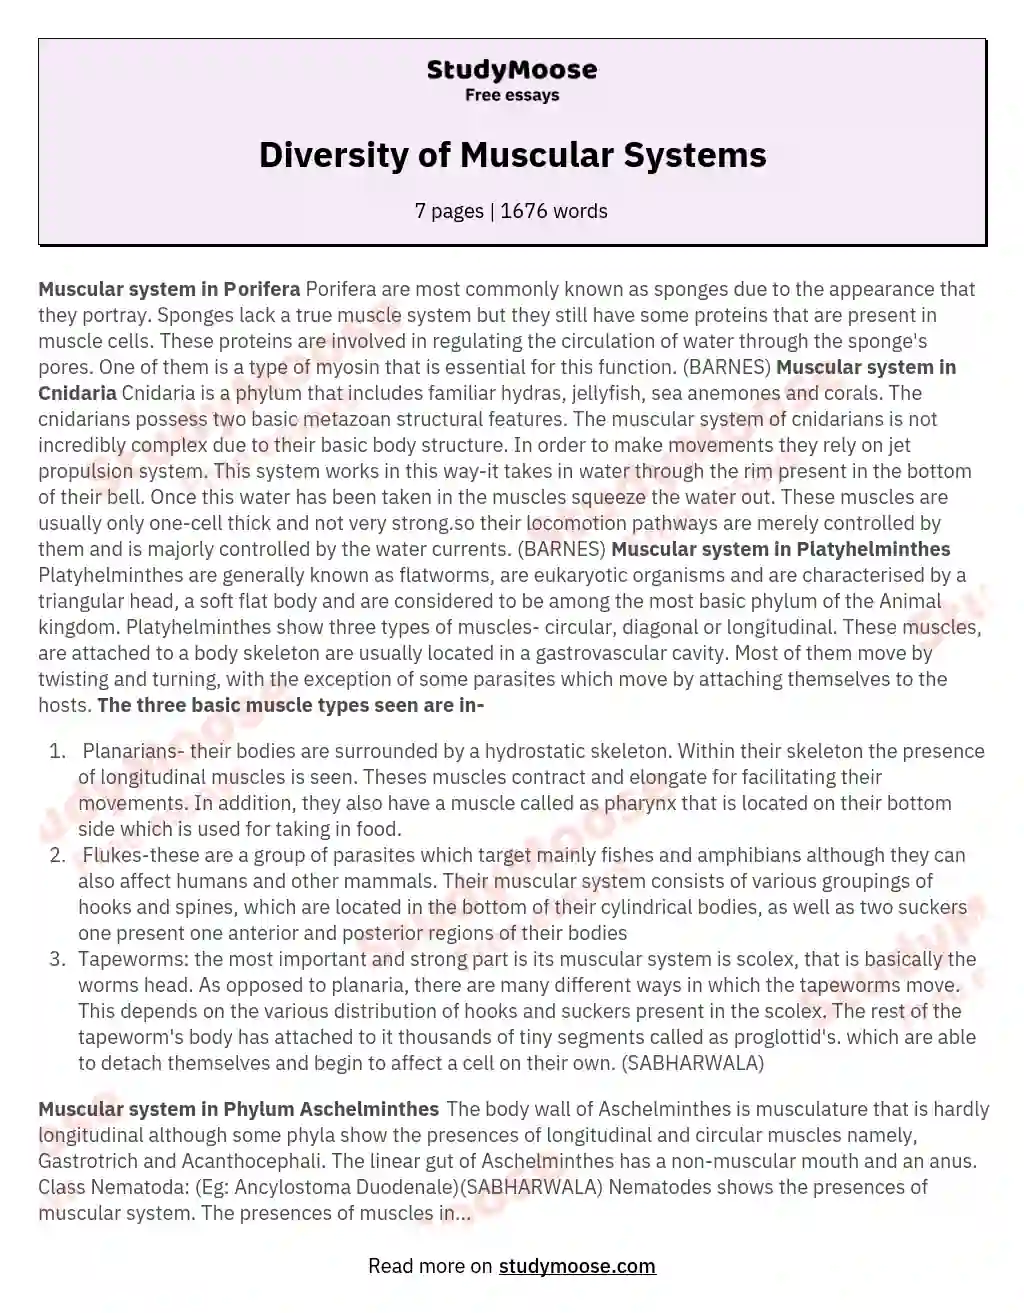 Diversity of Muscular Systems essay